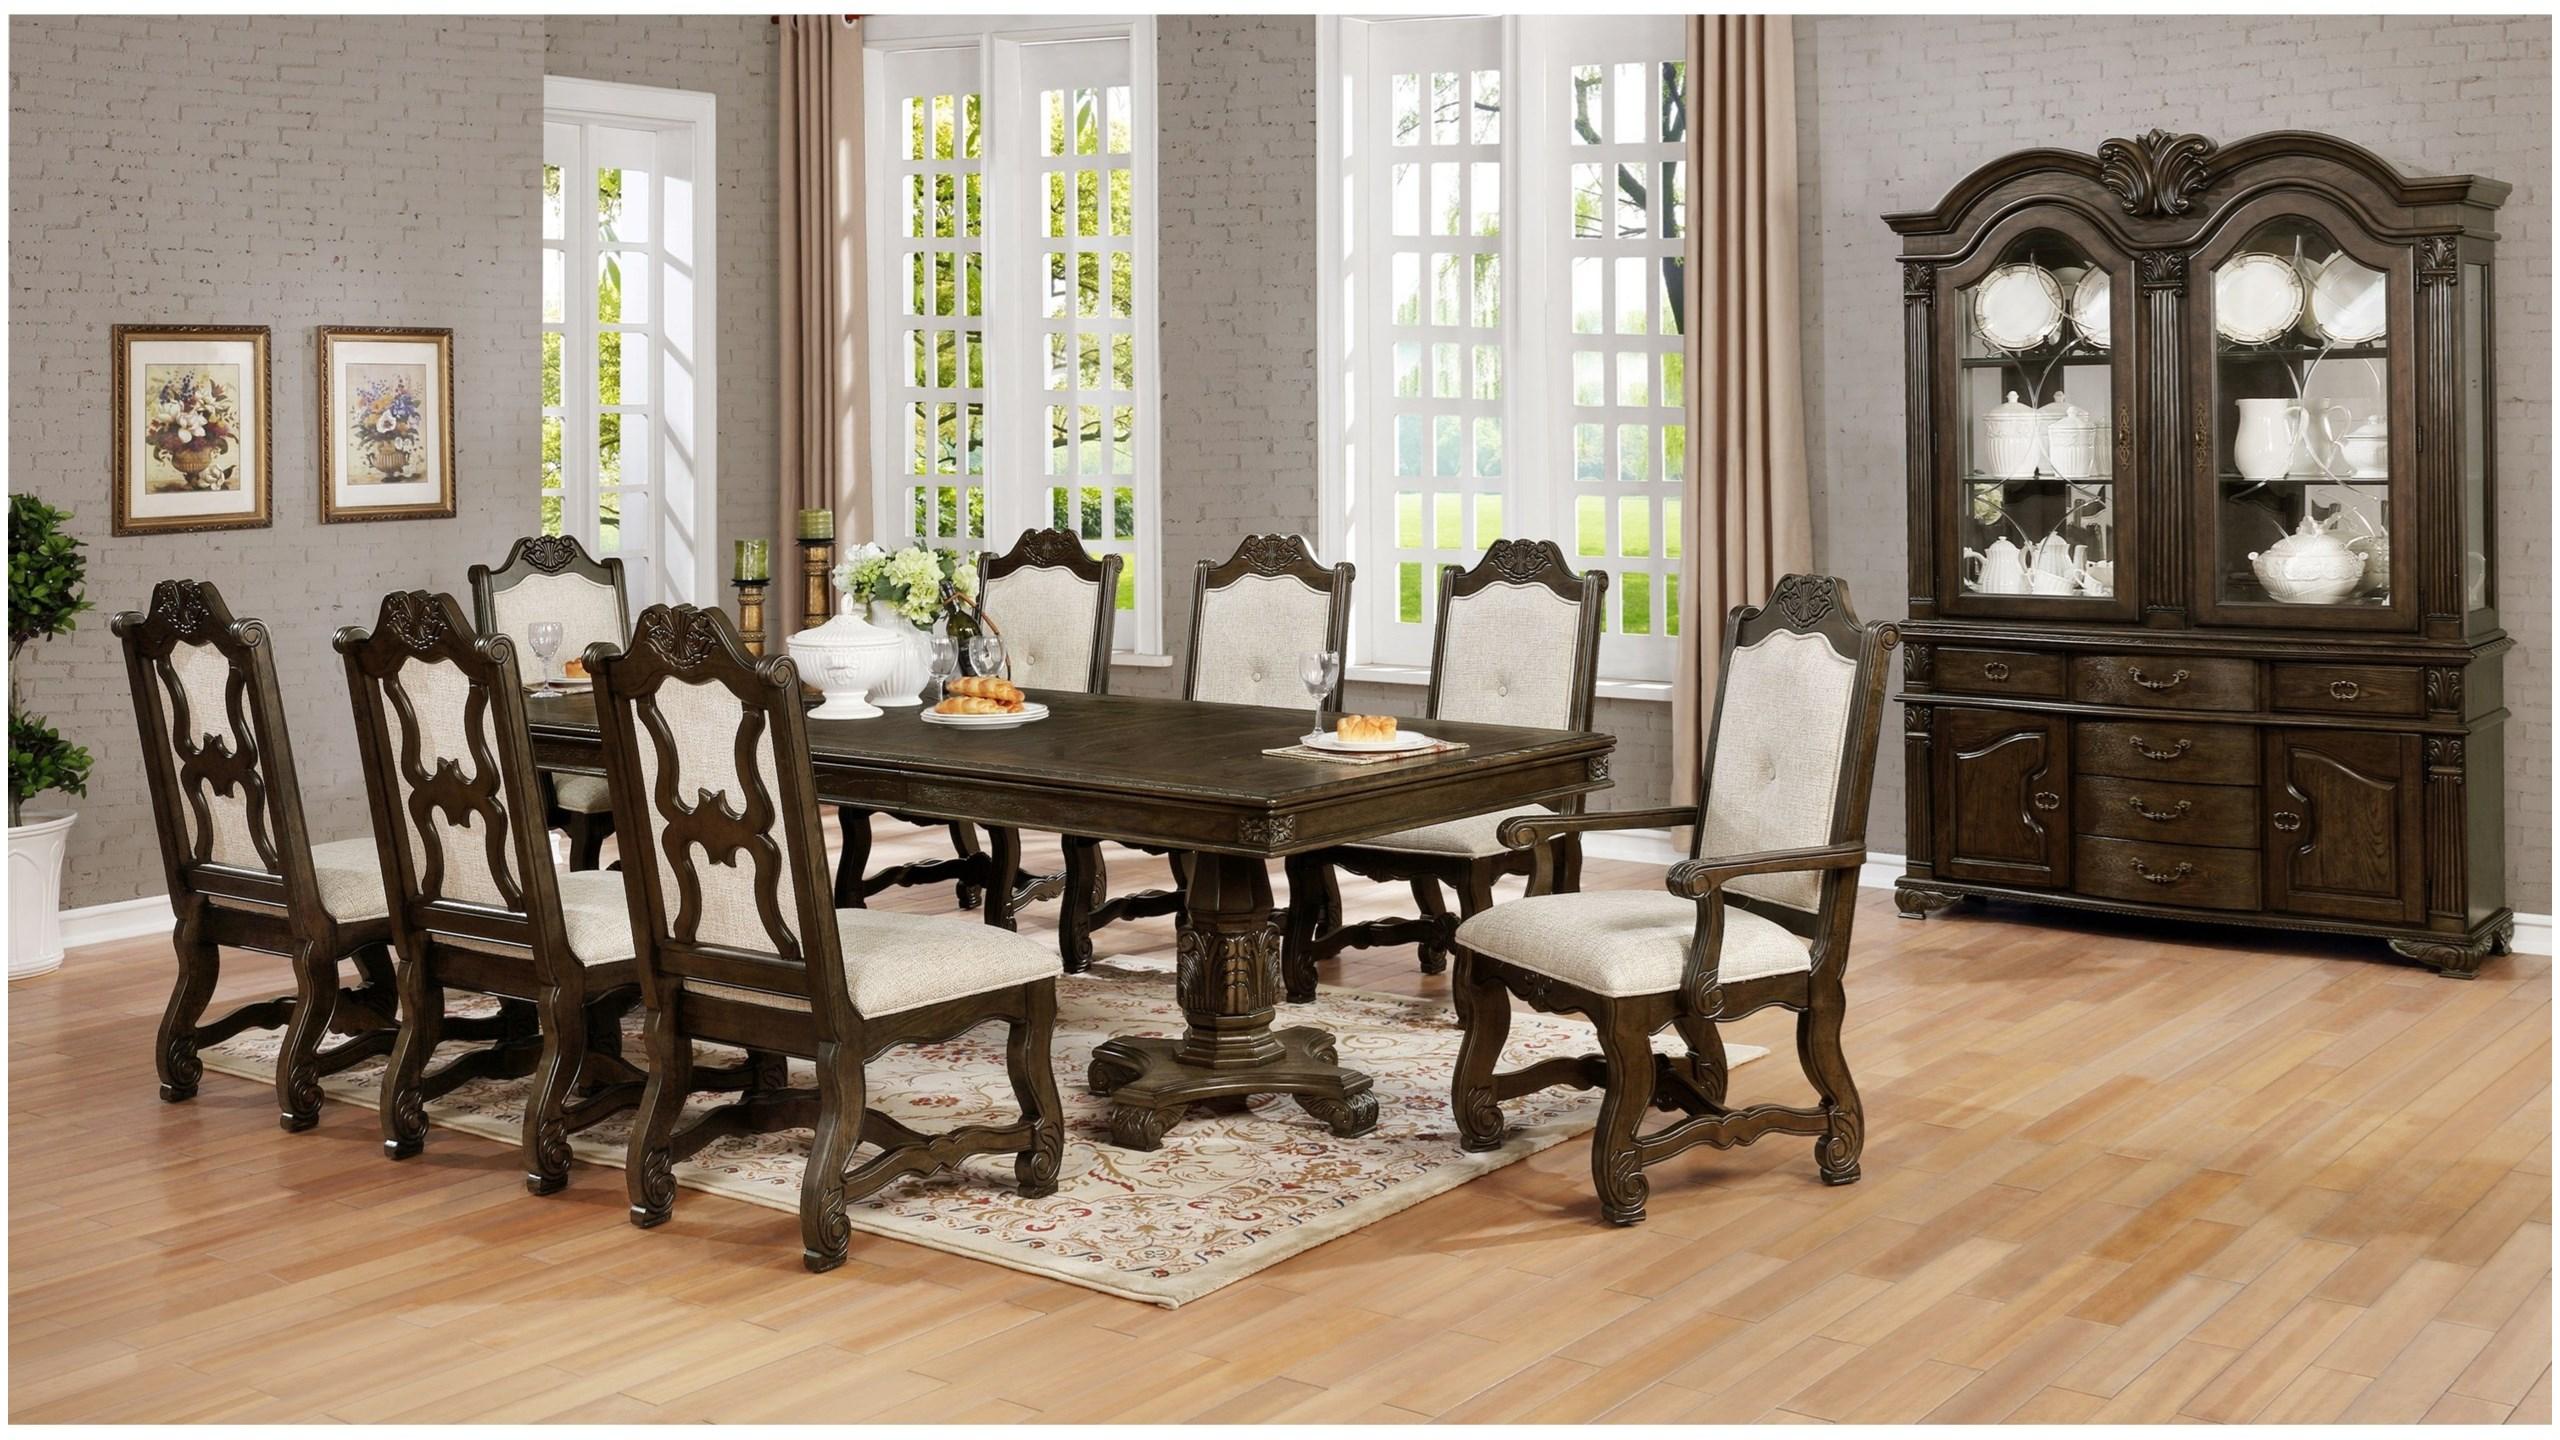 

    
Rustic Brown Dining Room Set by Crown Mark Neo Renaissance 2420T-44108-11pcs
